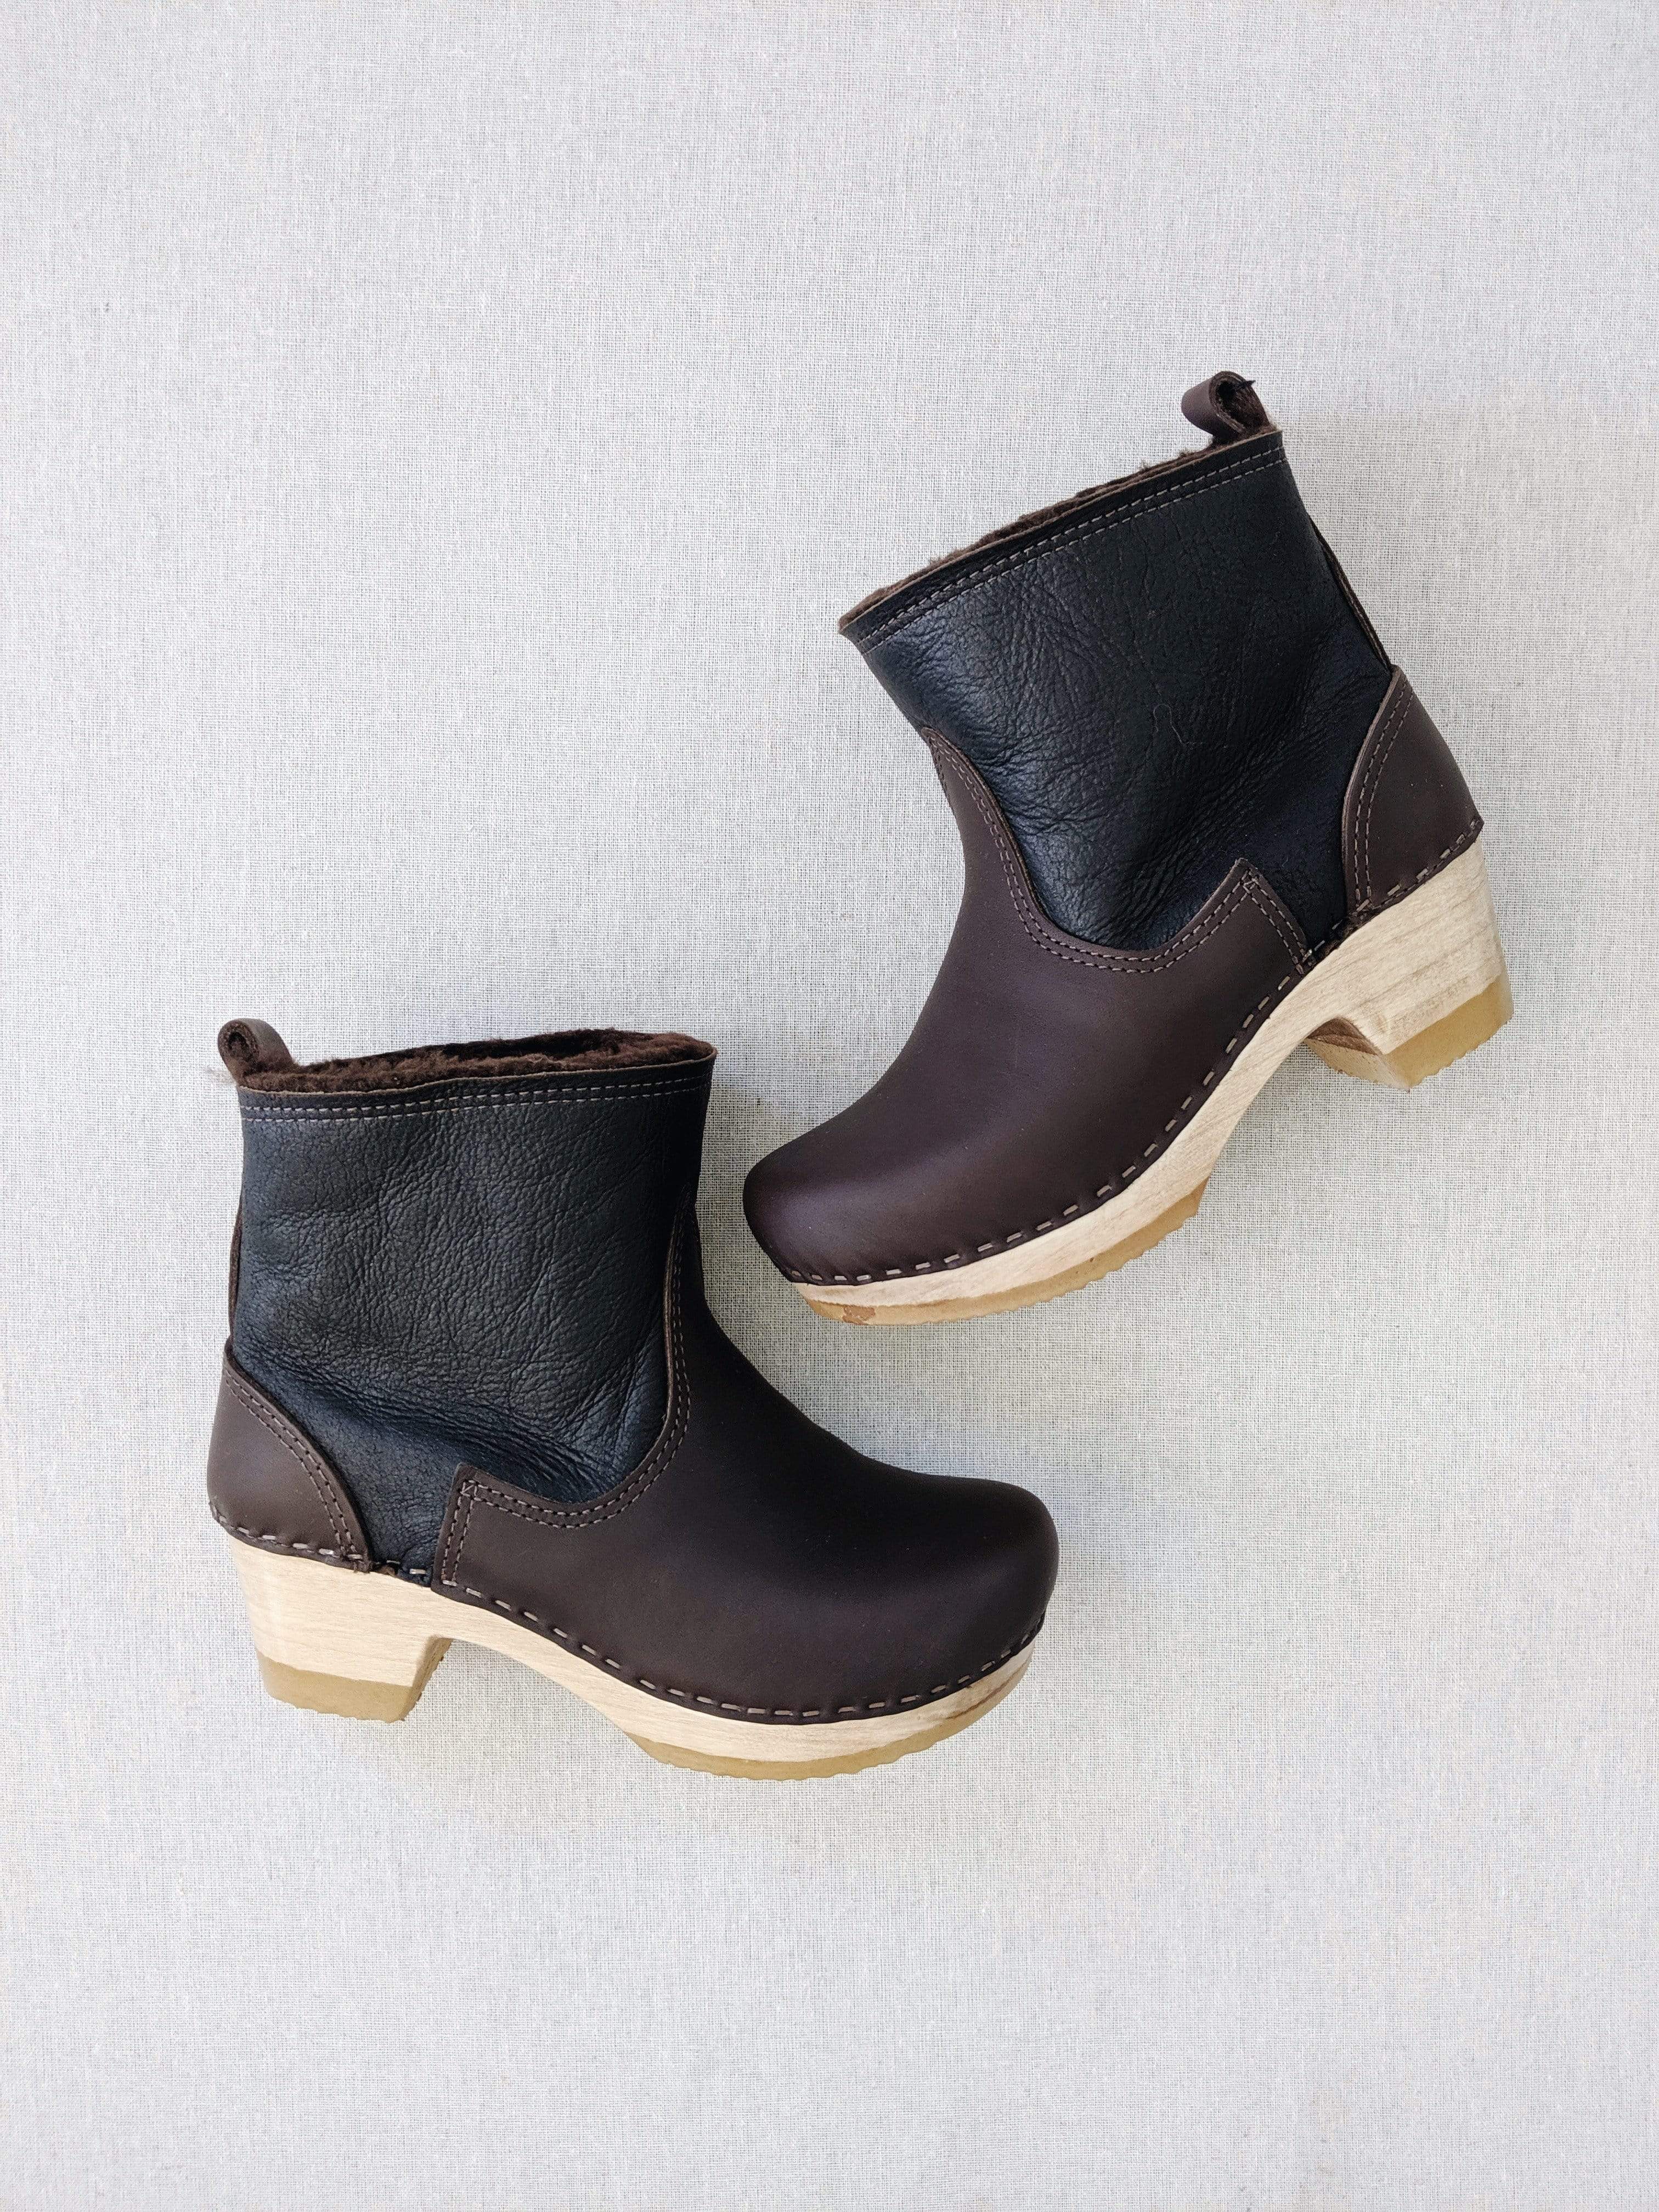 pull on shearling clog boot on mid heel in espresso aviator